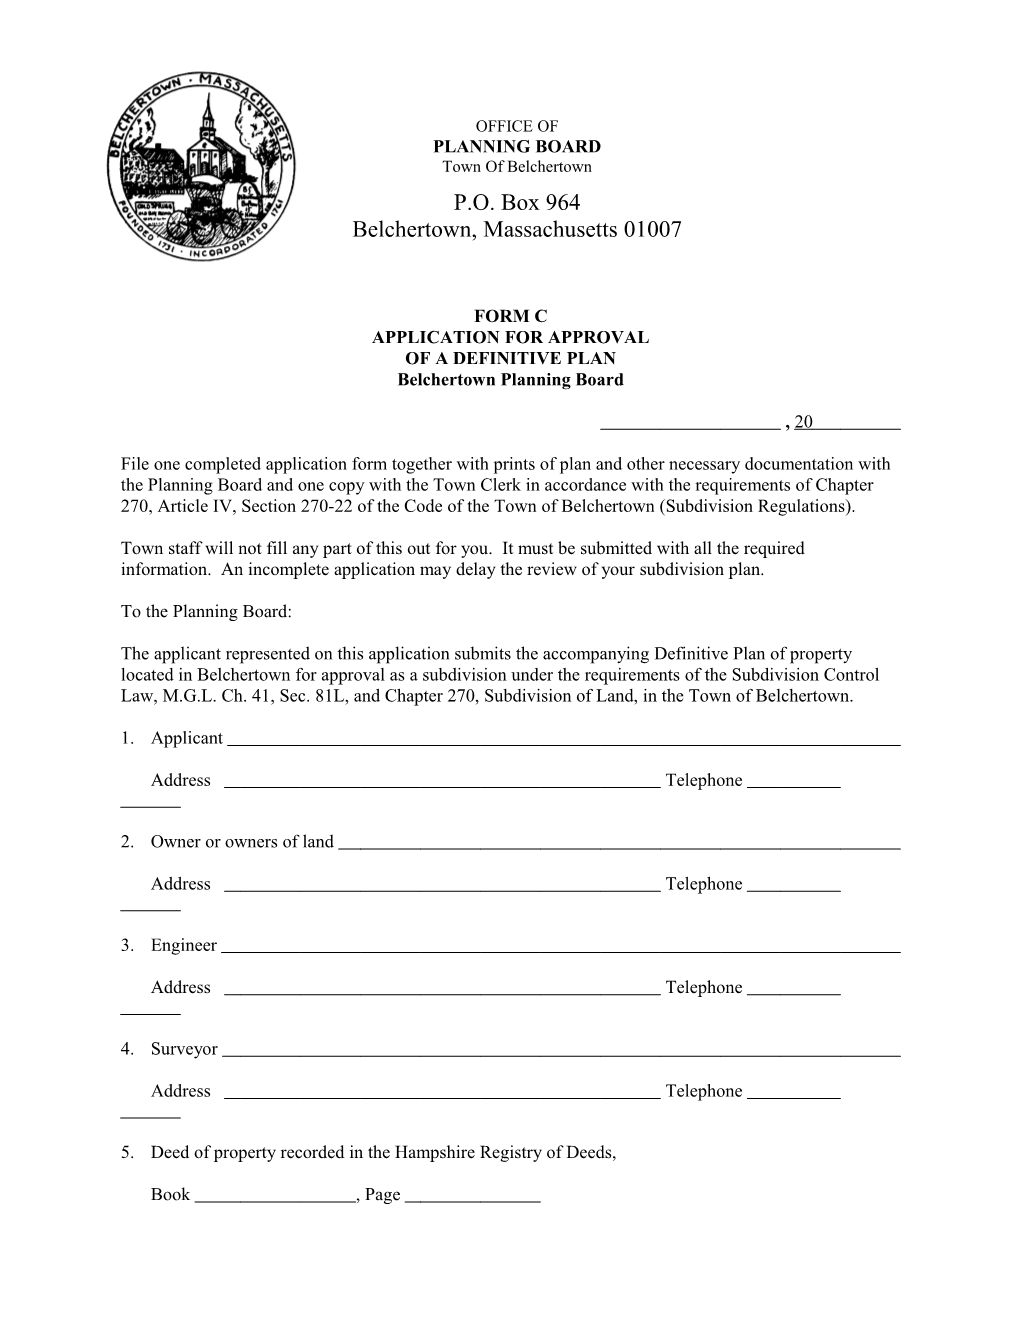 FORM C - Application for a Definitive Subdivision1